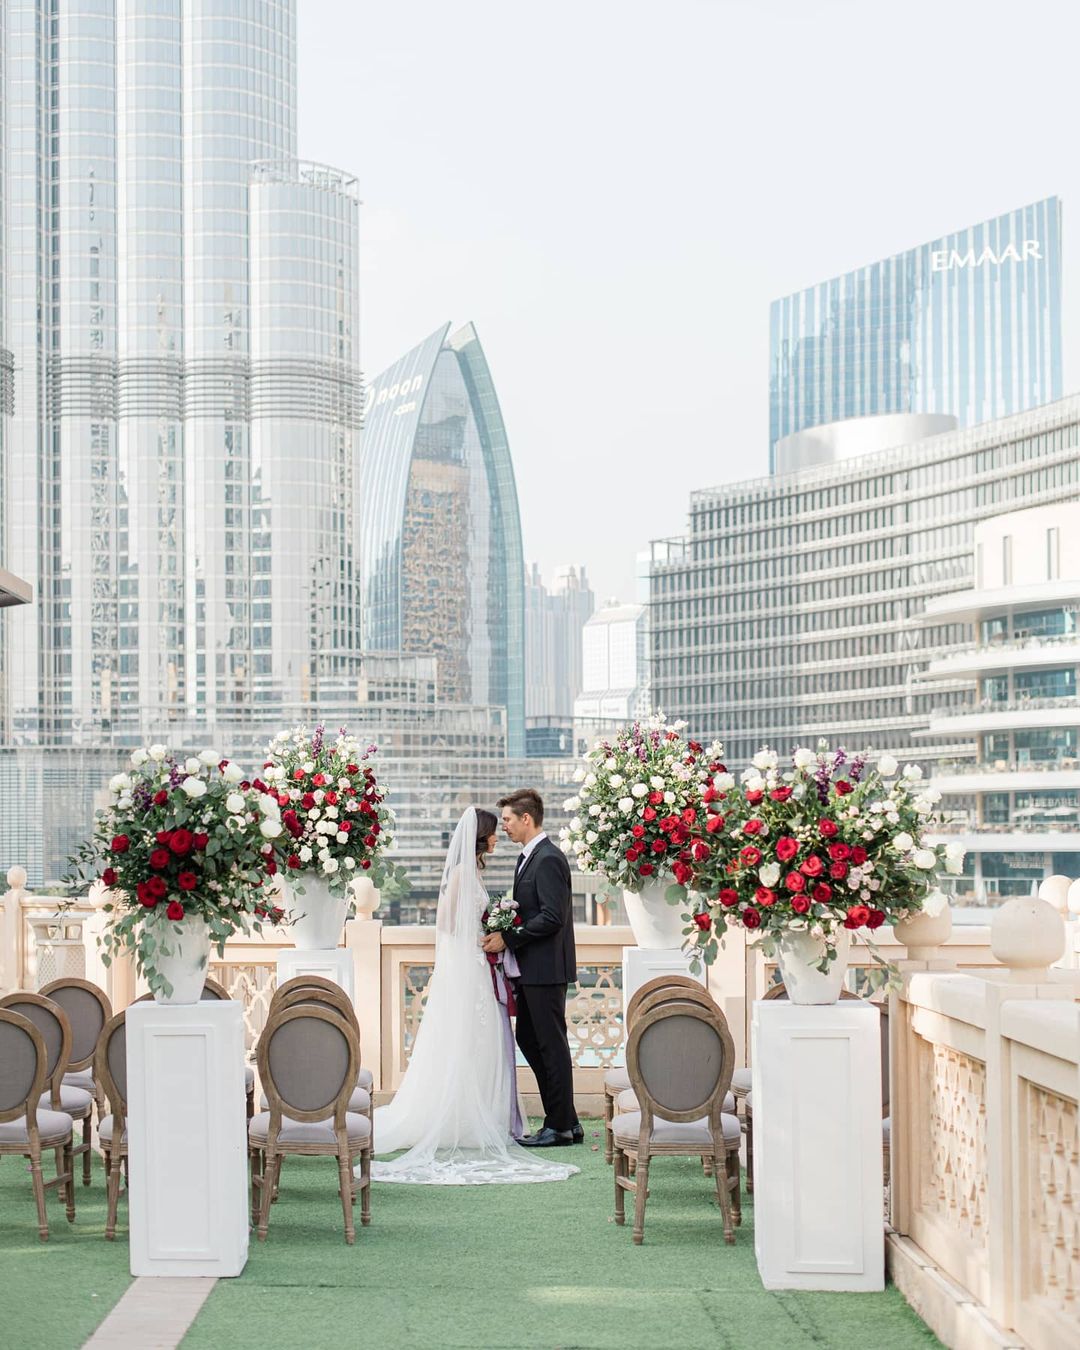 The gorgeous view from one of the most popular wedding venue in the UAE, the Palace Downtown in Dubai.